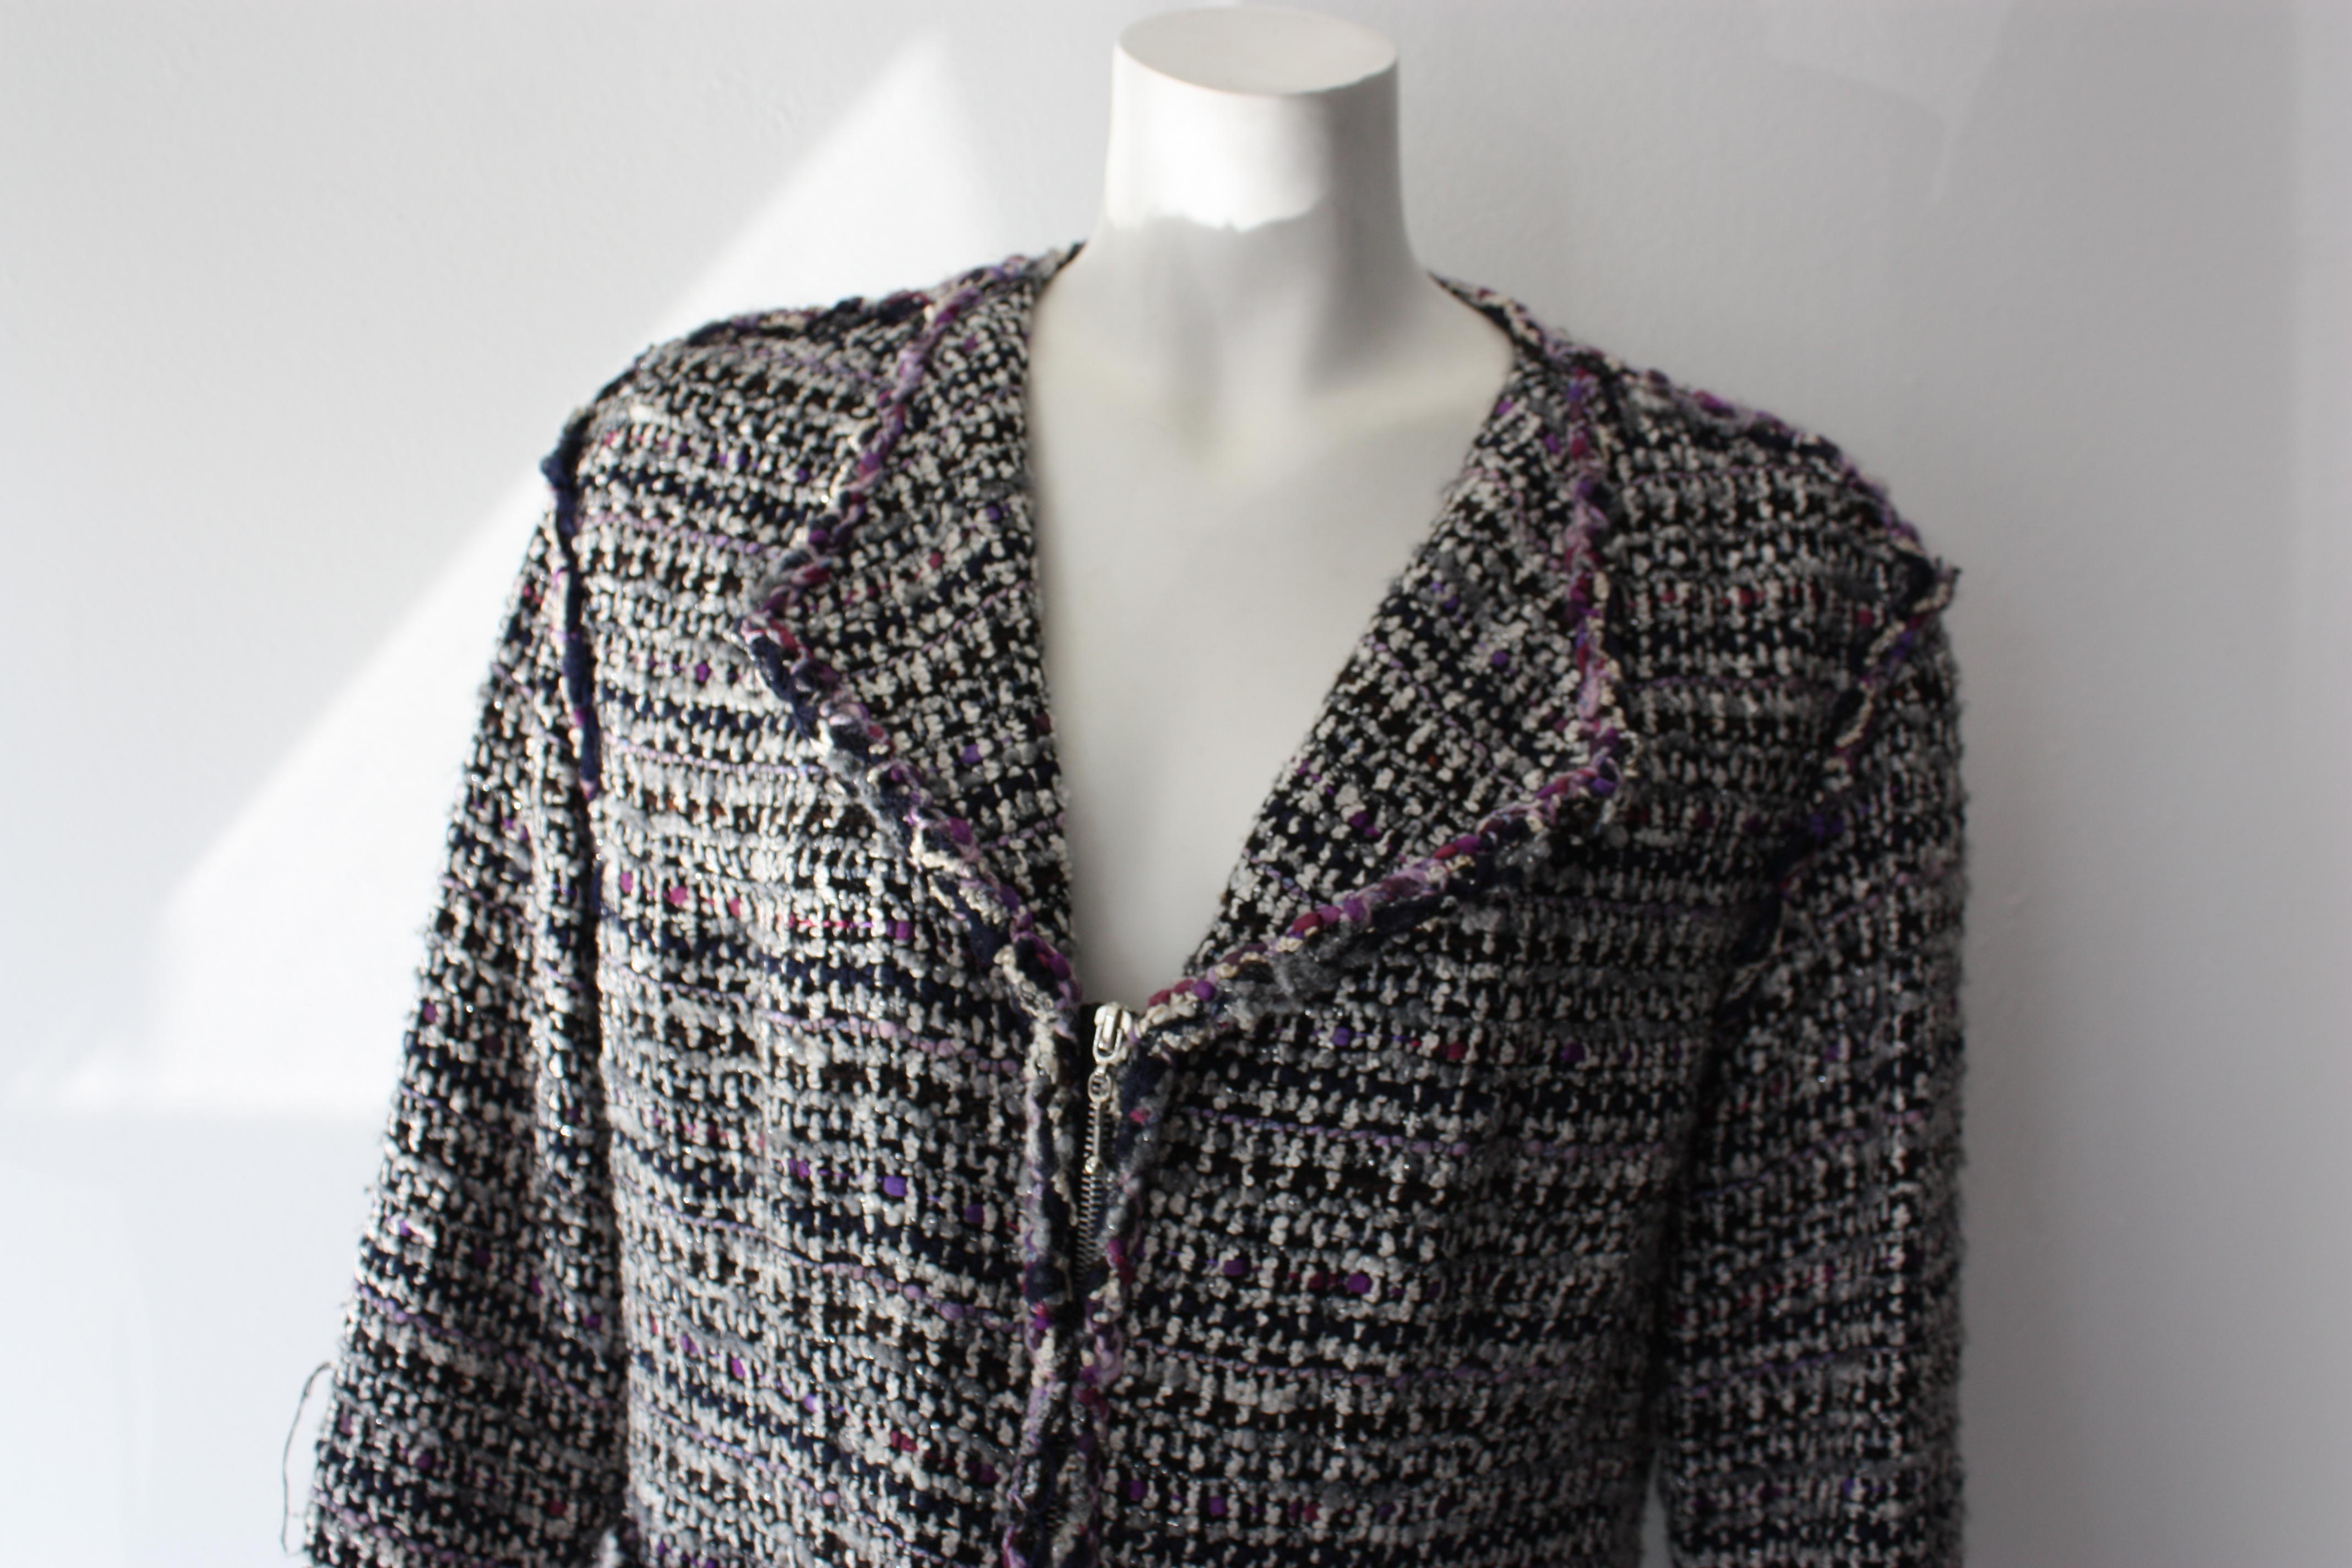 Chanel tweed blazer. Zip up and front waist pockets.
Purple, white and black tweed. 

66% wool, 18% nylon, 10% silk, 6% polyester. Lining: 100% silk.

Size 44 (fits smaller) 